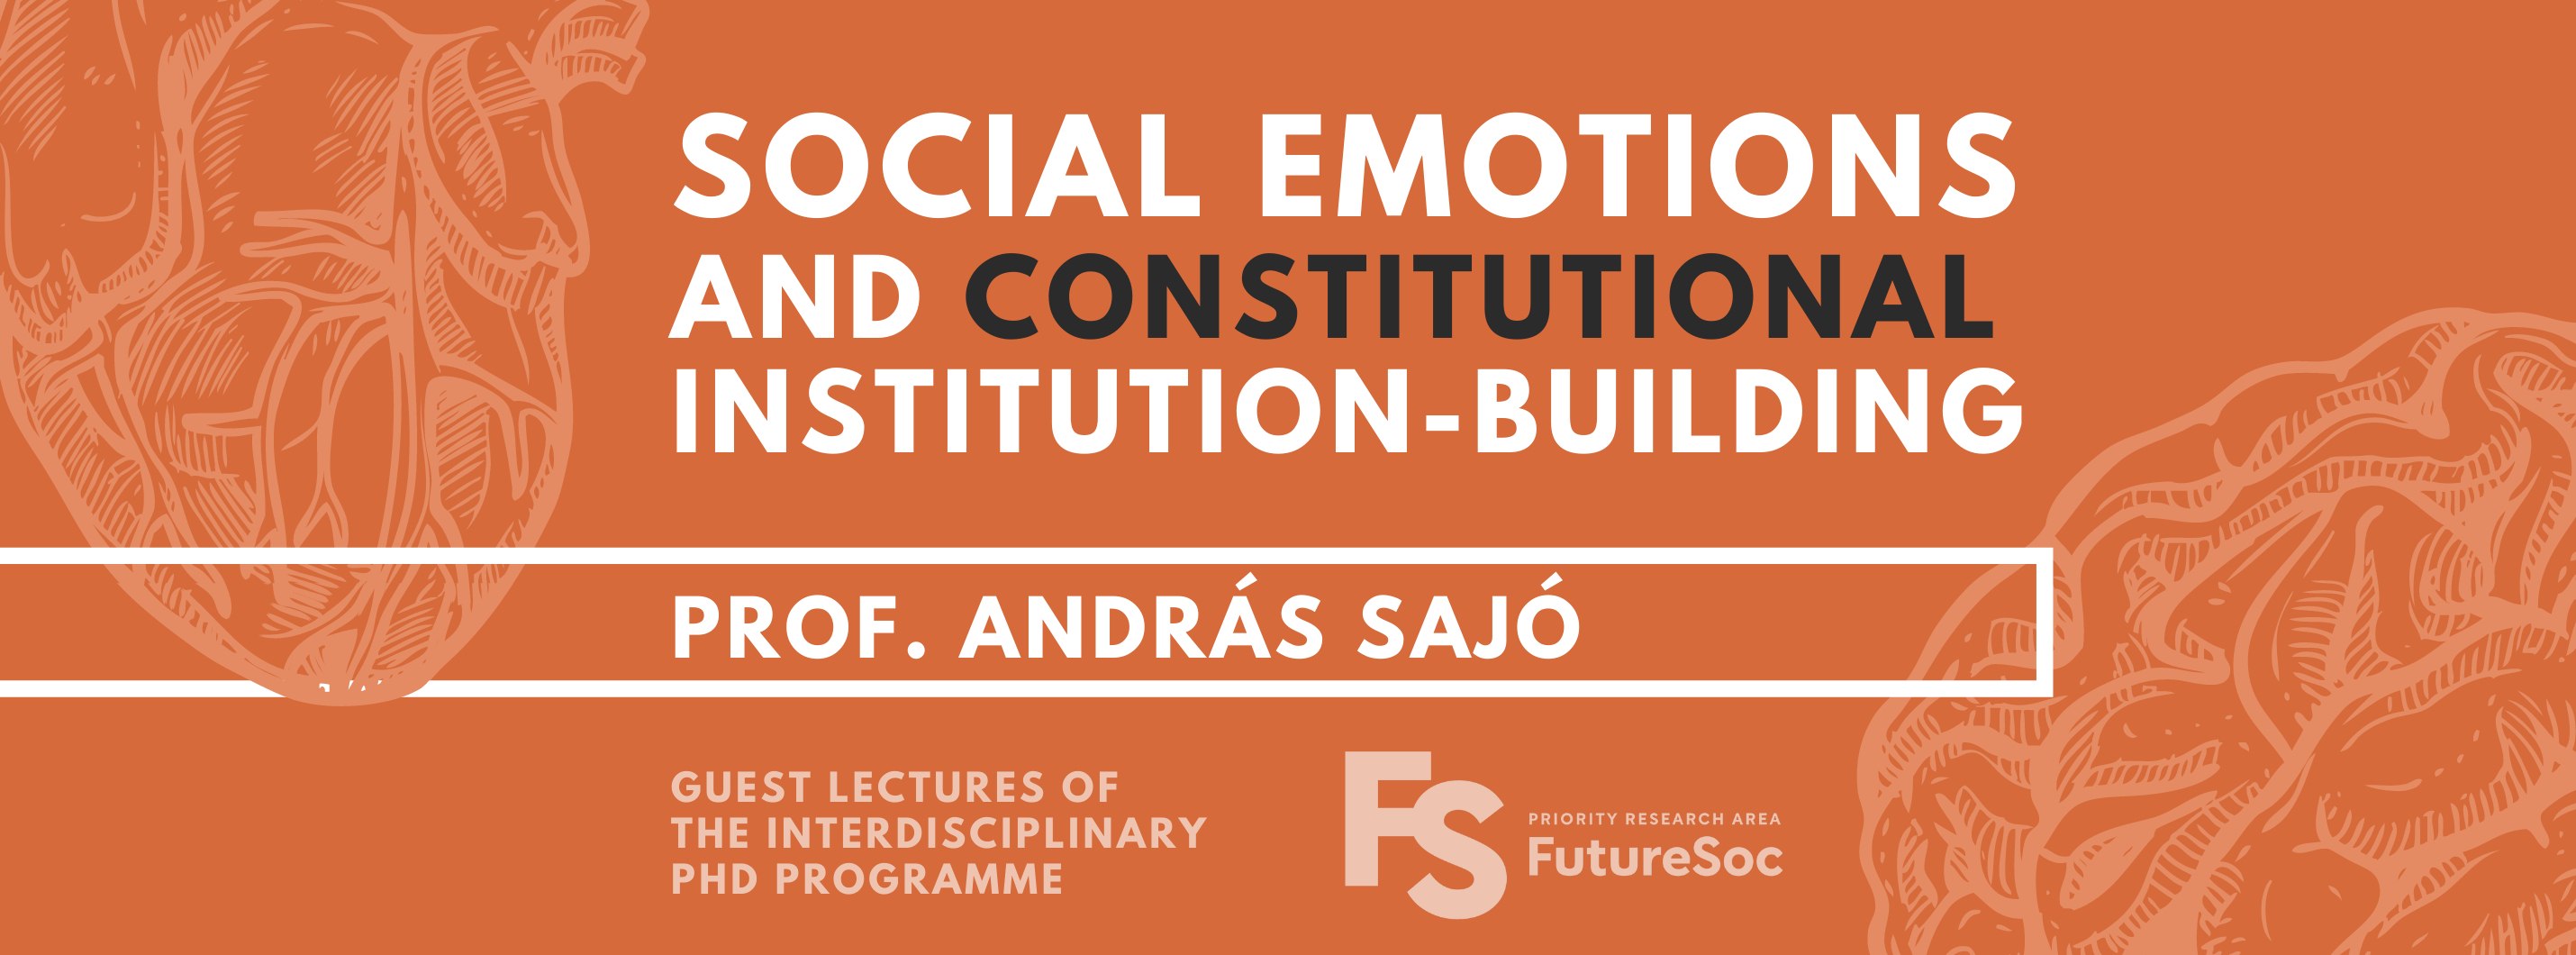 Text: "Social emotions and constitutional institution-building", prof. András Sajó. Guest lectures of the Interdisciplinary PhD Programme. Logo: Priority Research Area FutureSoc. Background: orange with graphics of a heart and a brain.